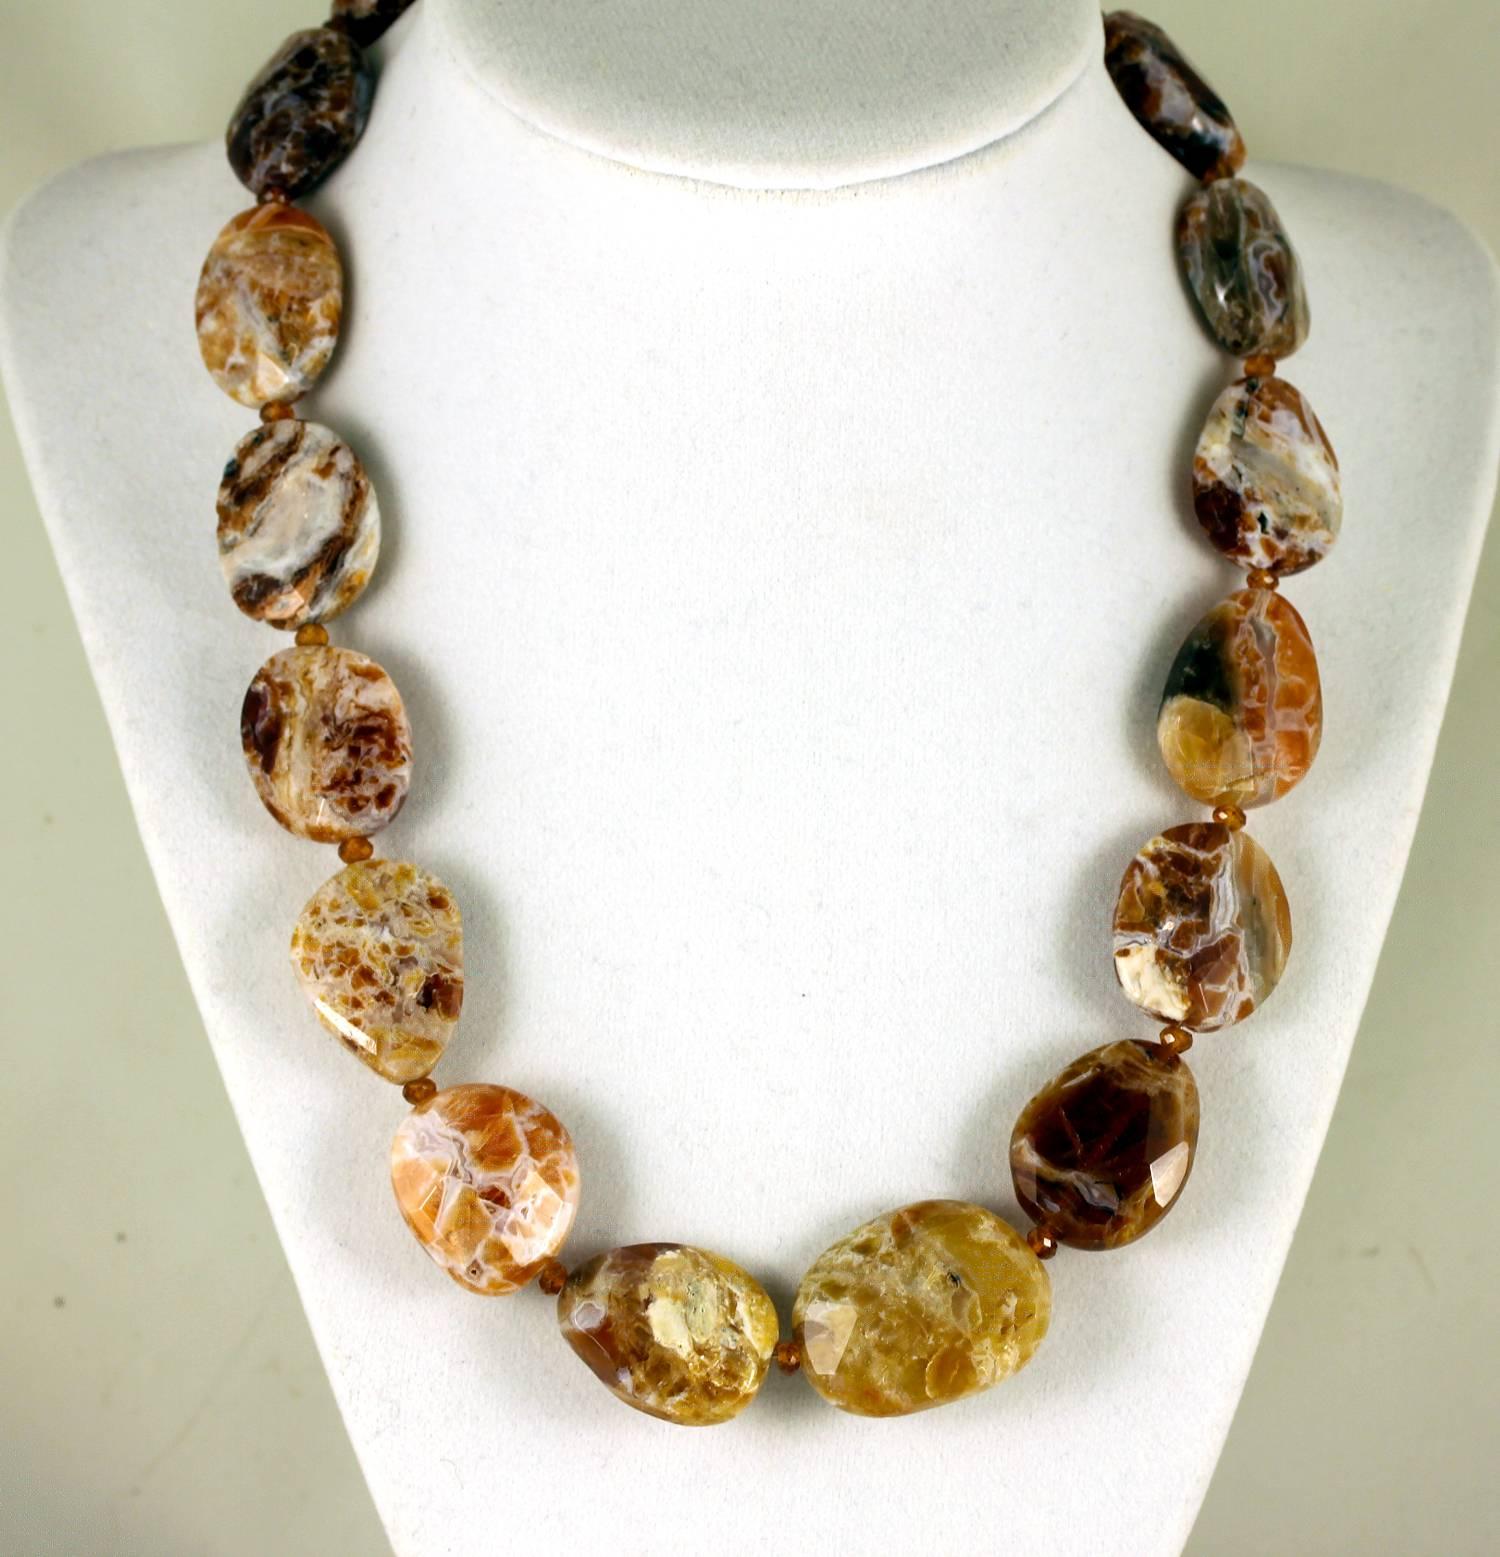 This rare unique handmade Opal necklace is so varied in colors it is called Brandy Opal. It is partially translucent and is accented with sparkling gem cut Hessonite Garnets which enhance the differences in the colors,  Size: approximately 20 mm x